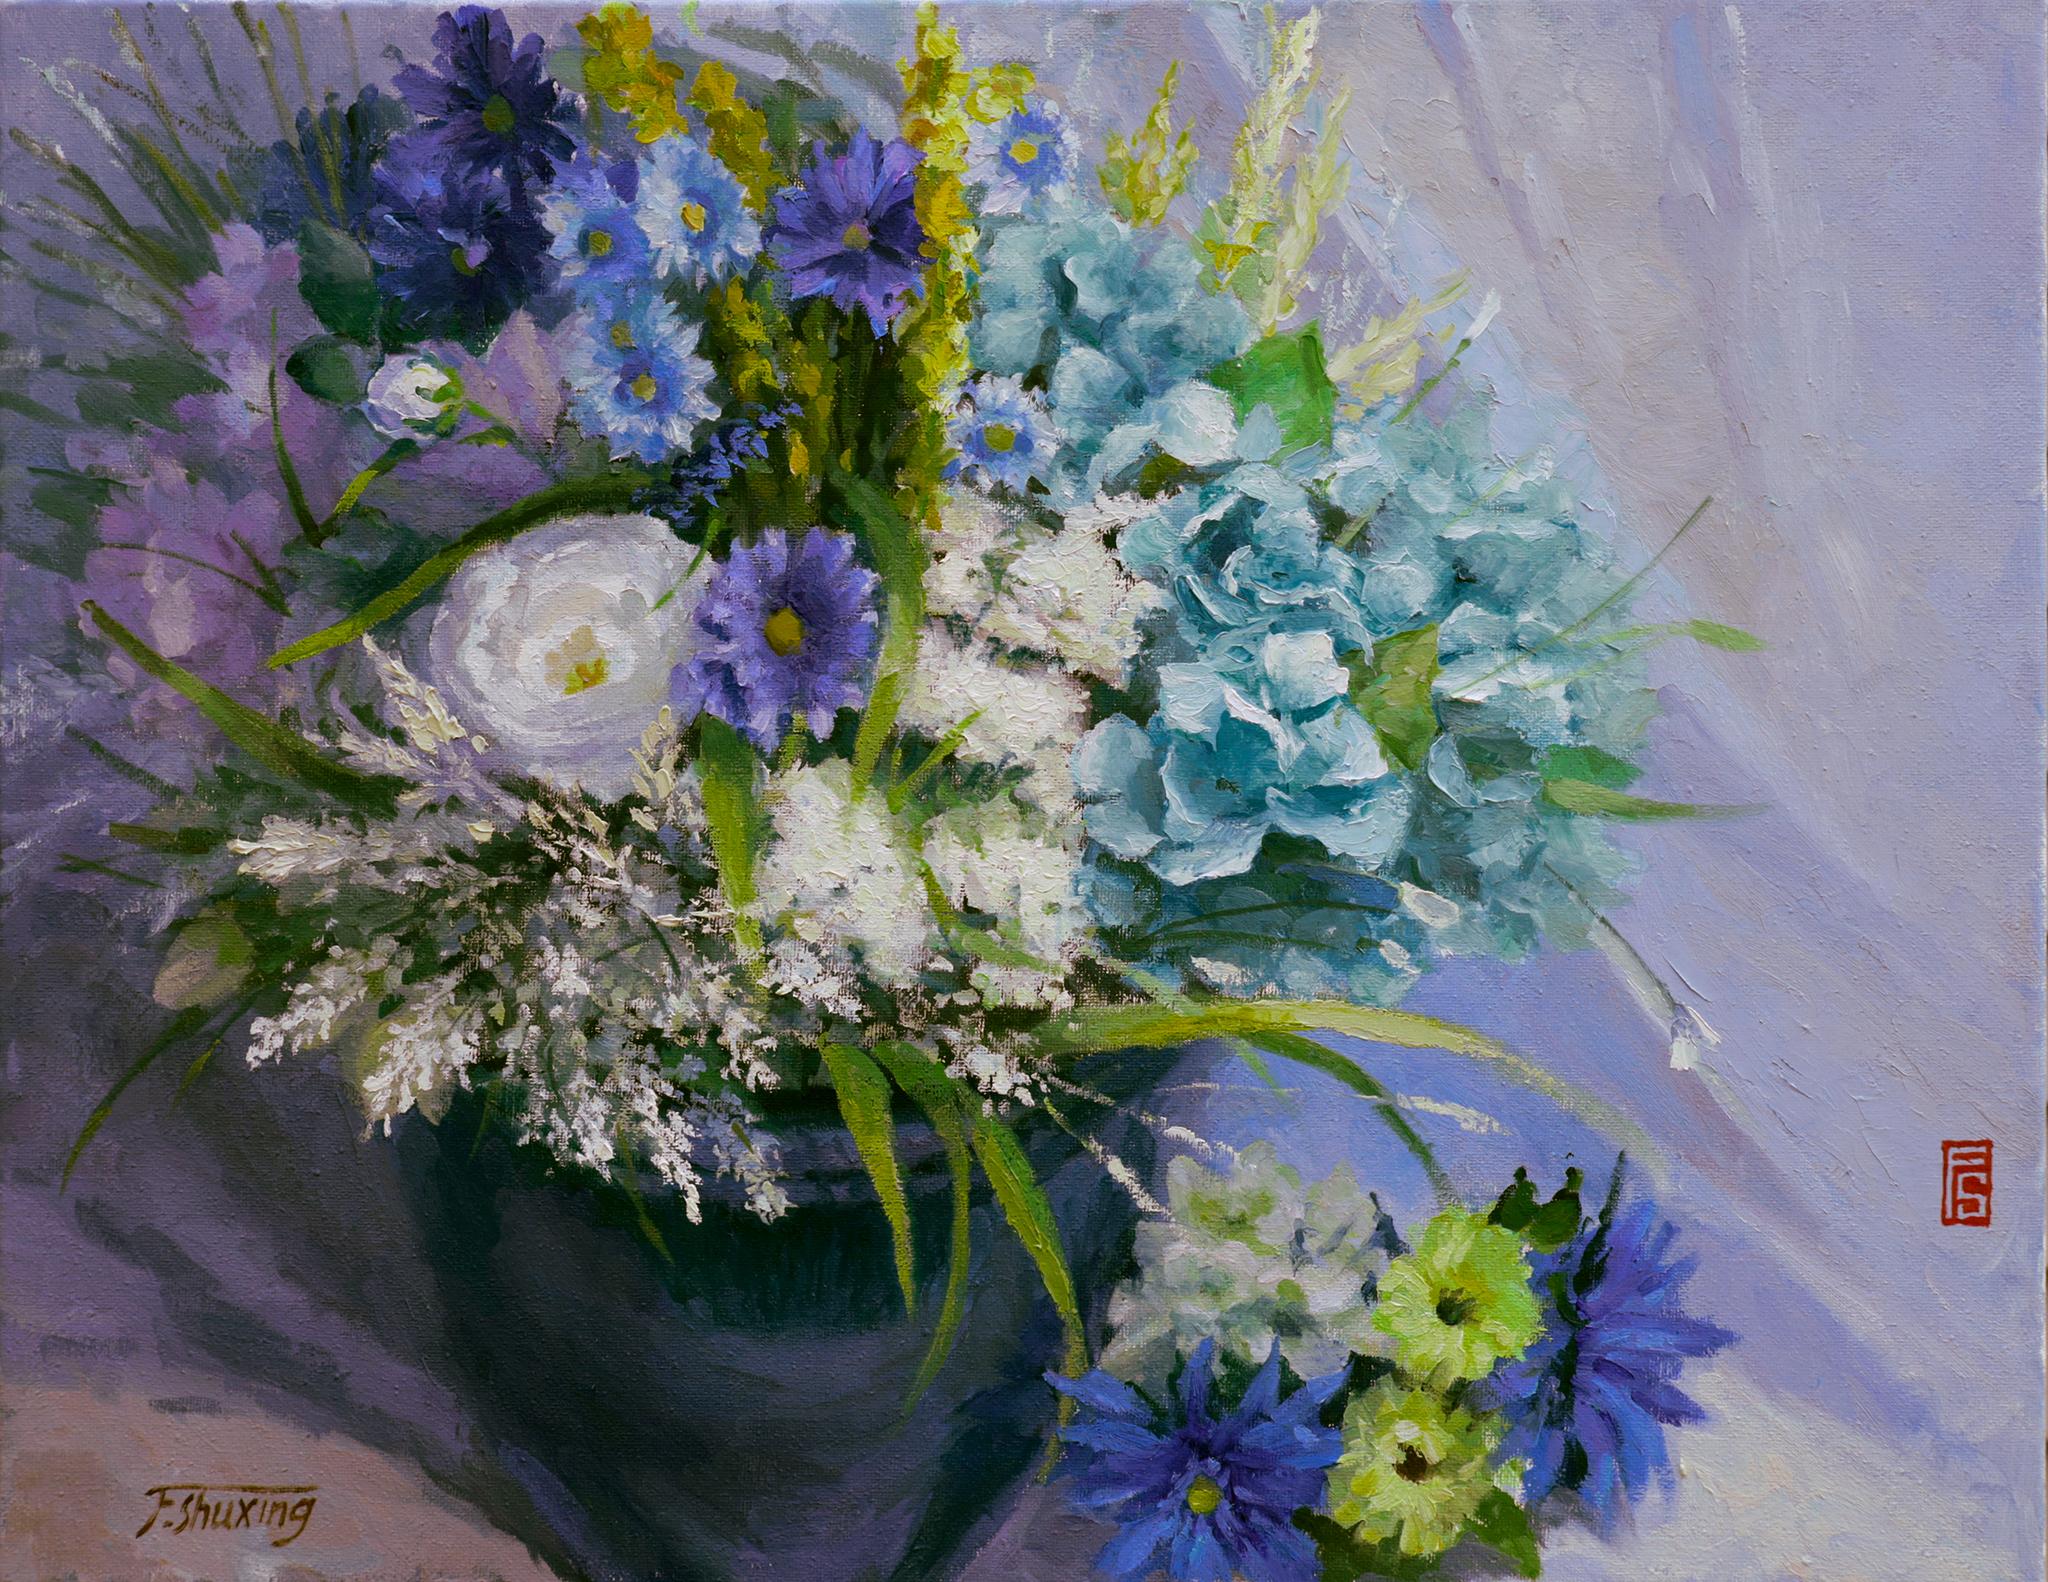 Shuxing Fan Still-Life Painting - Flowers, Oil Painting